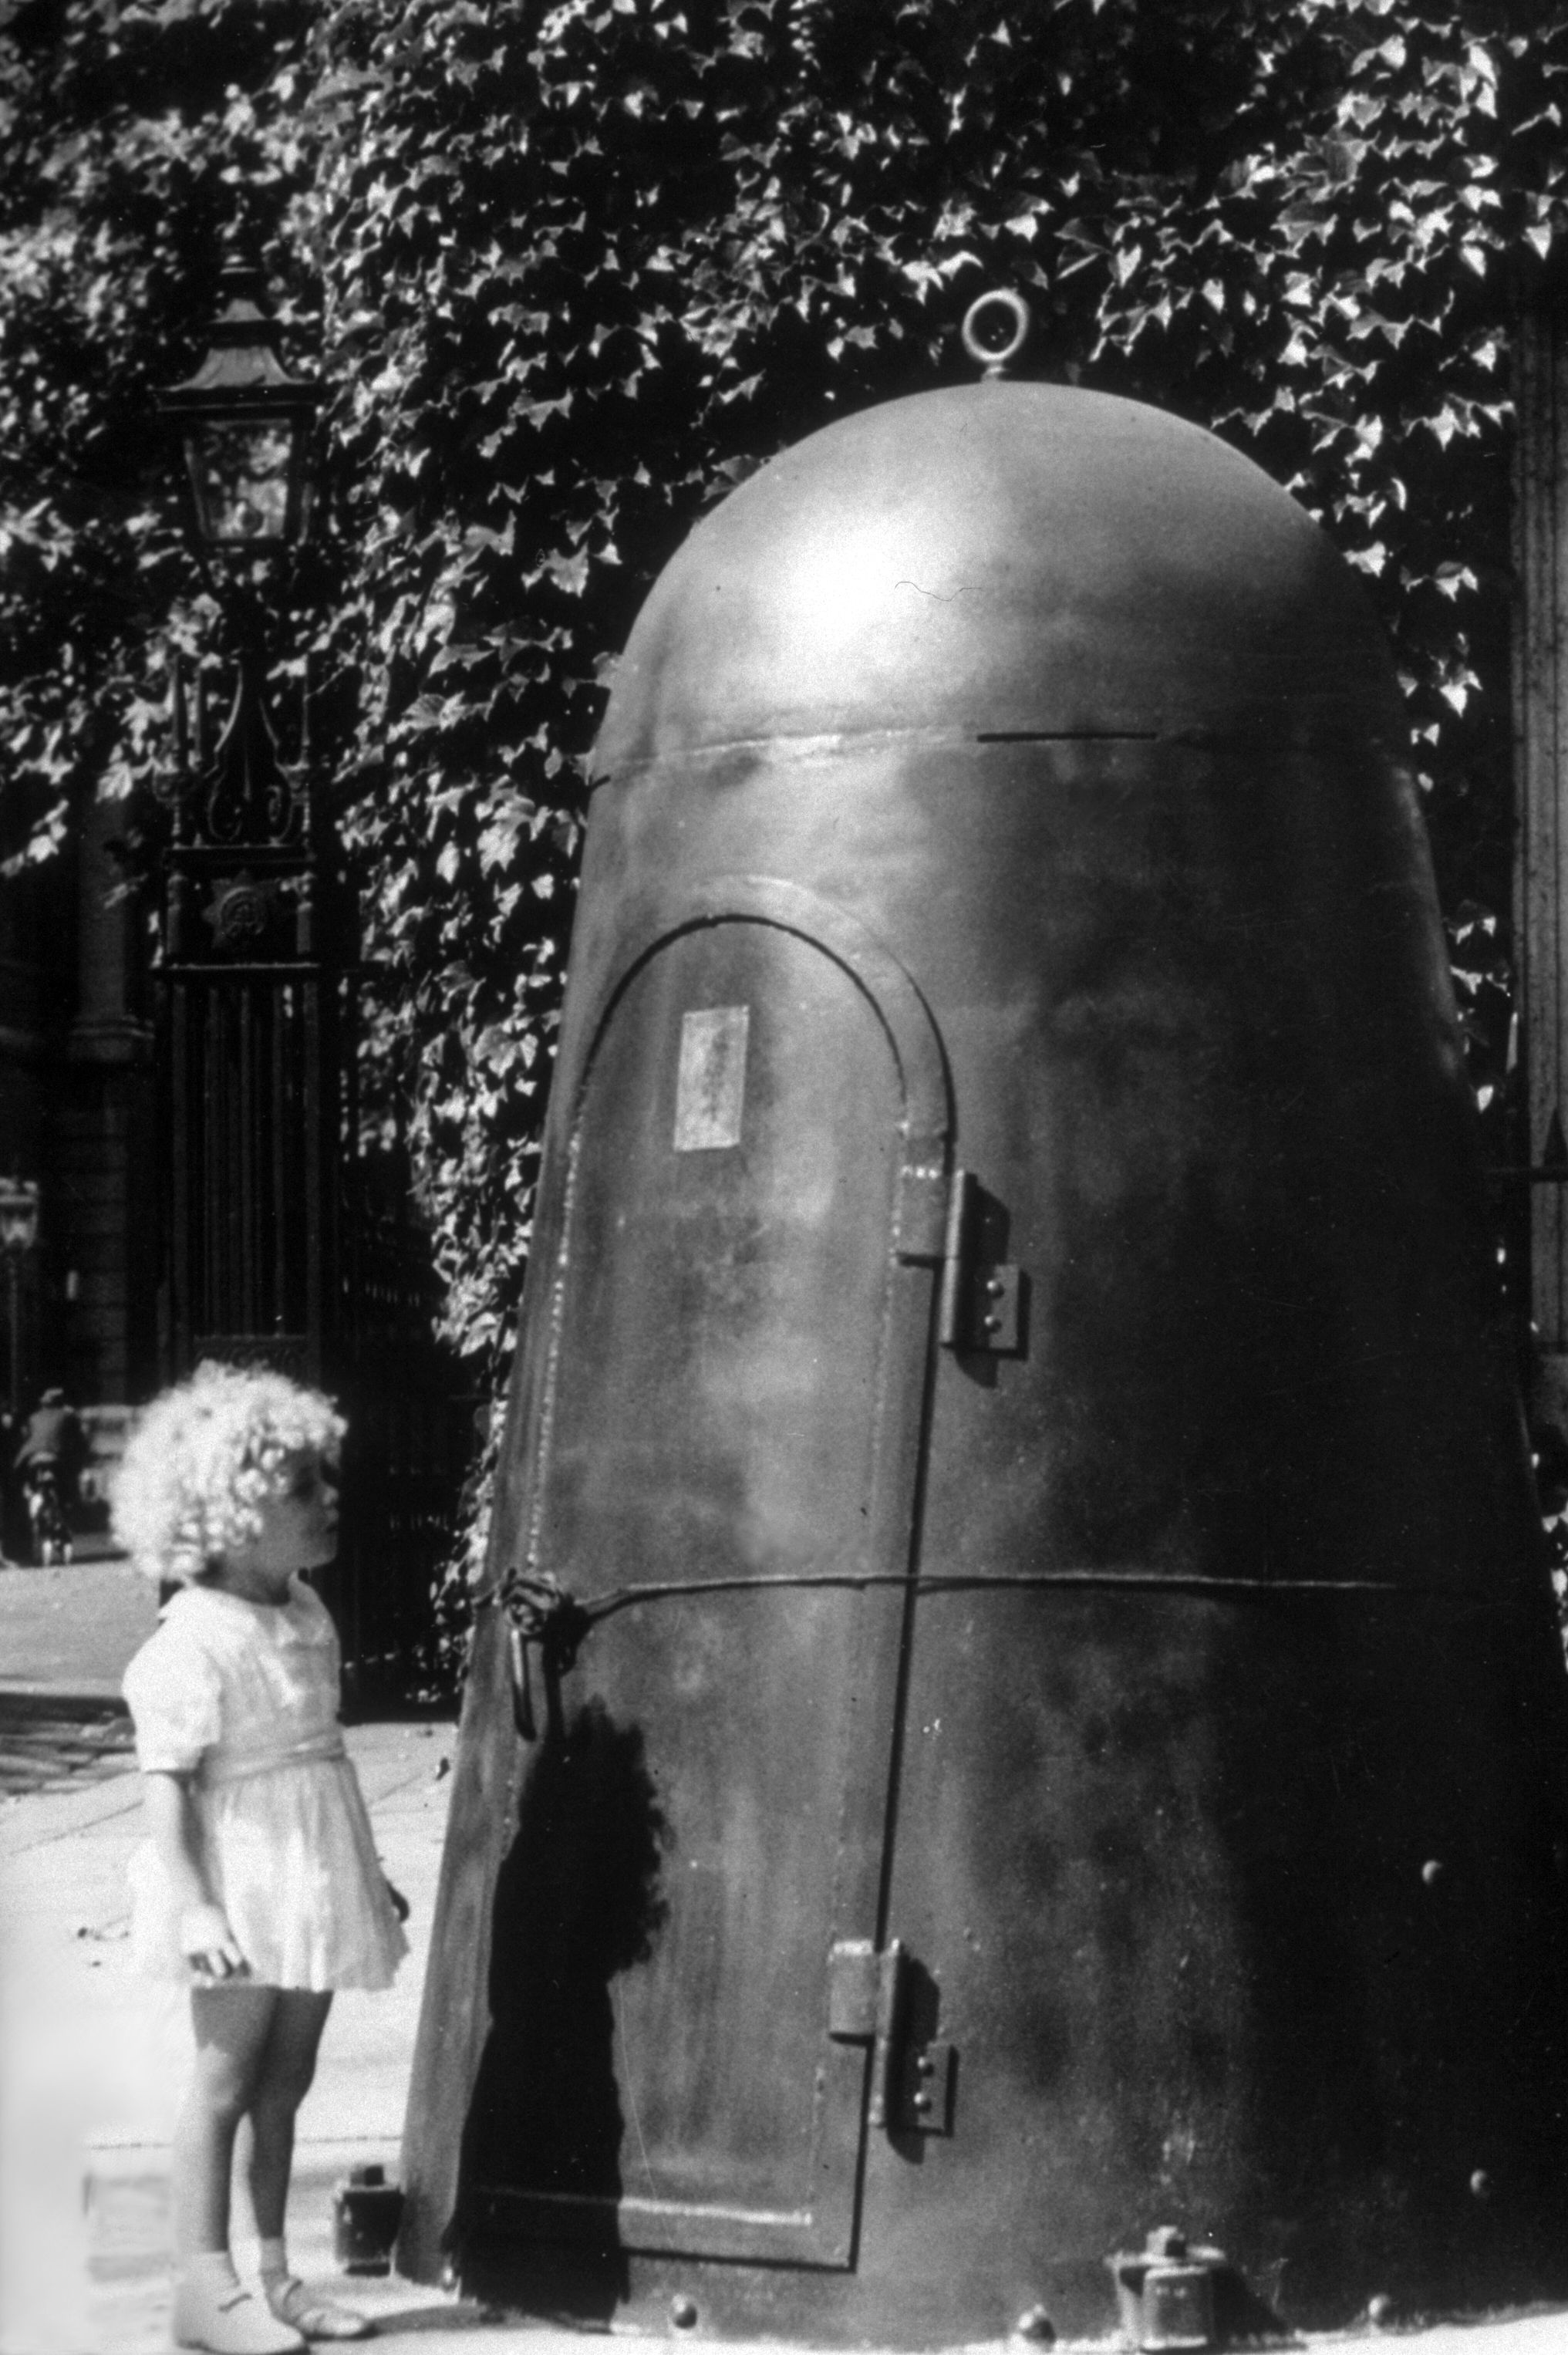 A young girl looking at the entrance to a public air-raid shelter.